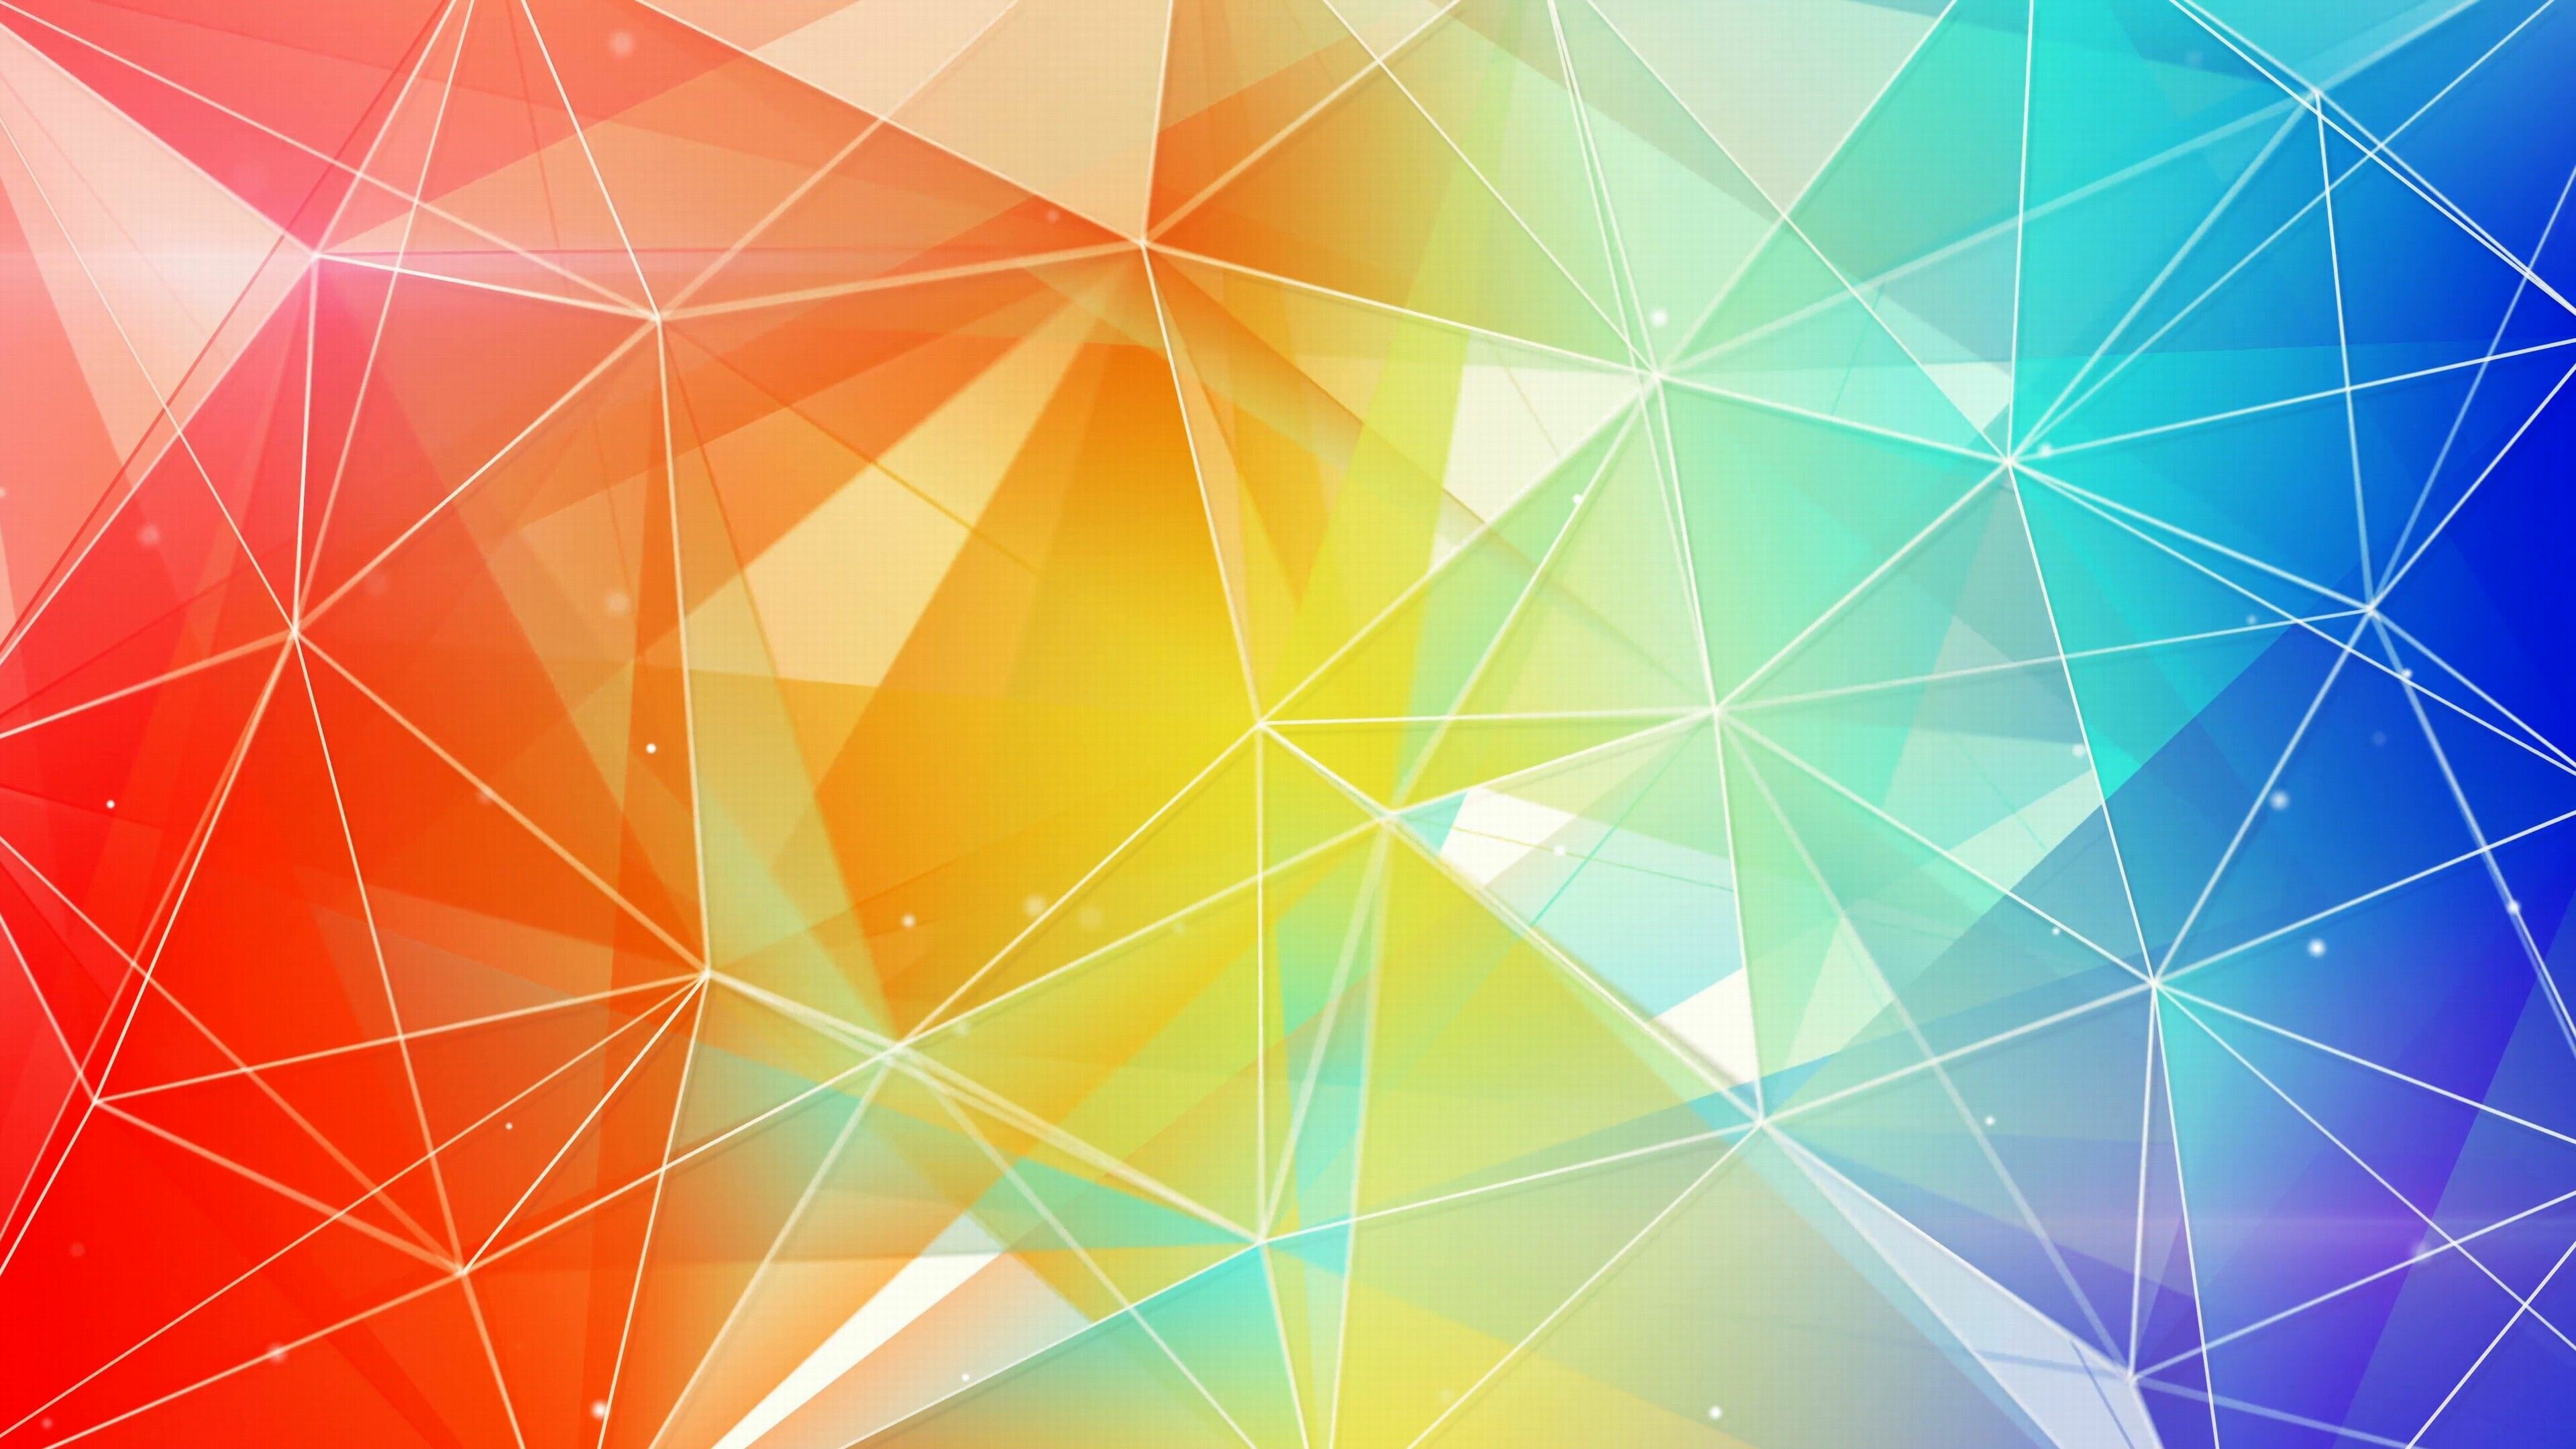 Geometry: Colorful ornament, Complementary angles, Line segments. 3840x2160 4K Background.